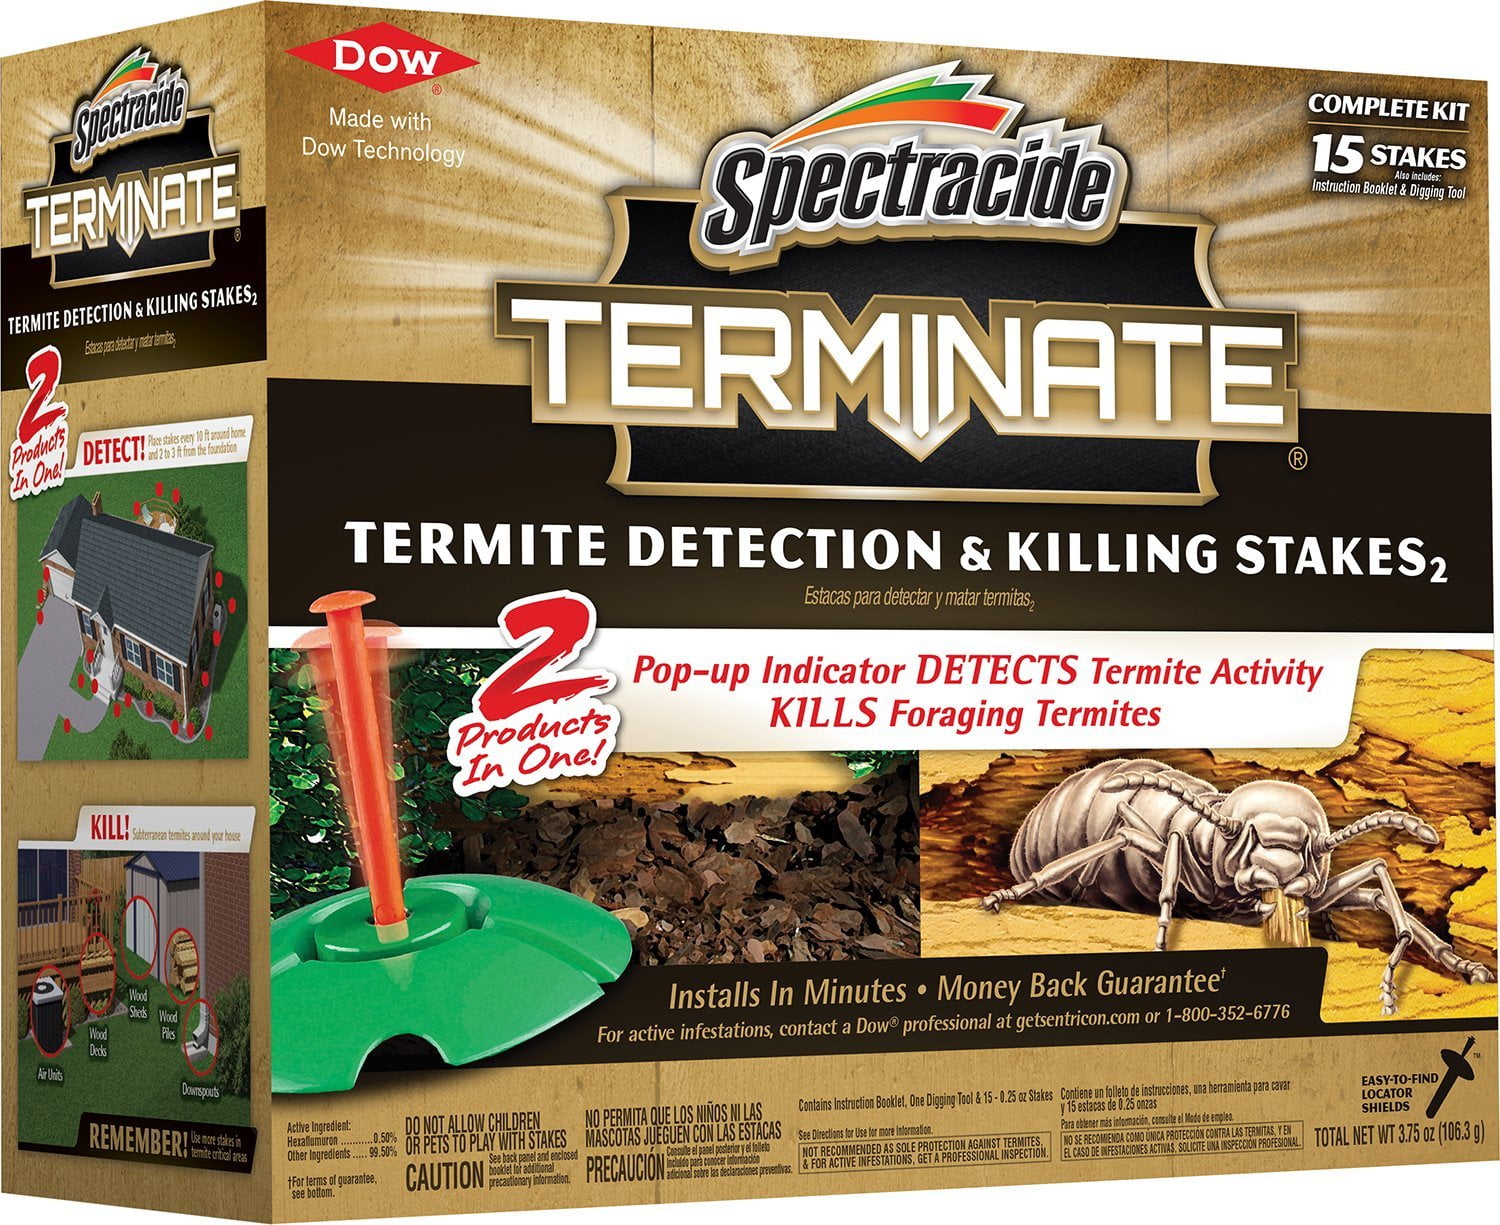 Spectracide Terminate Termite Detection And Killing Stakes, 15 Count